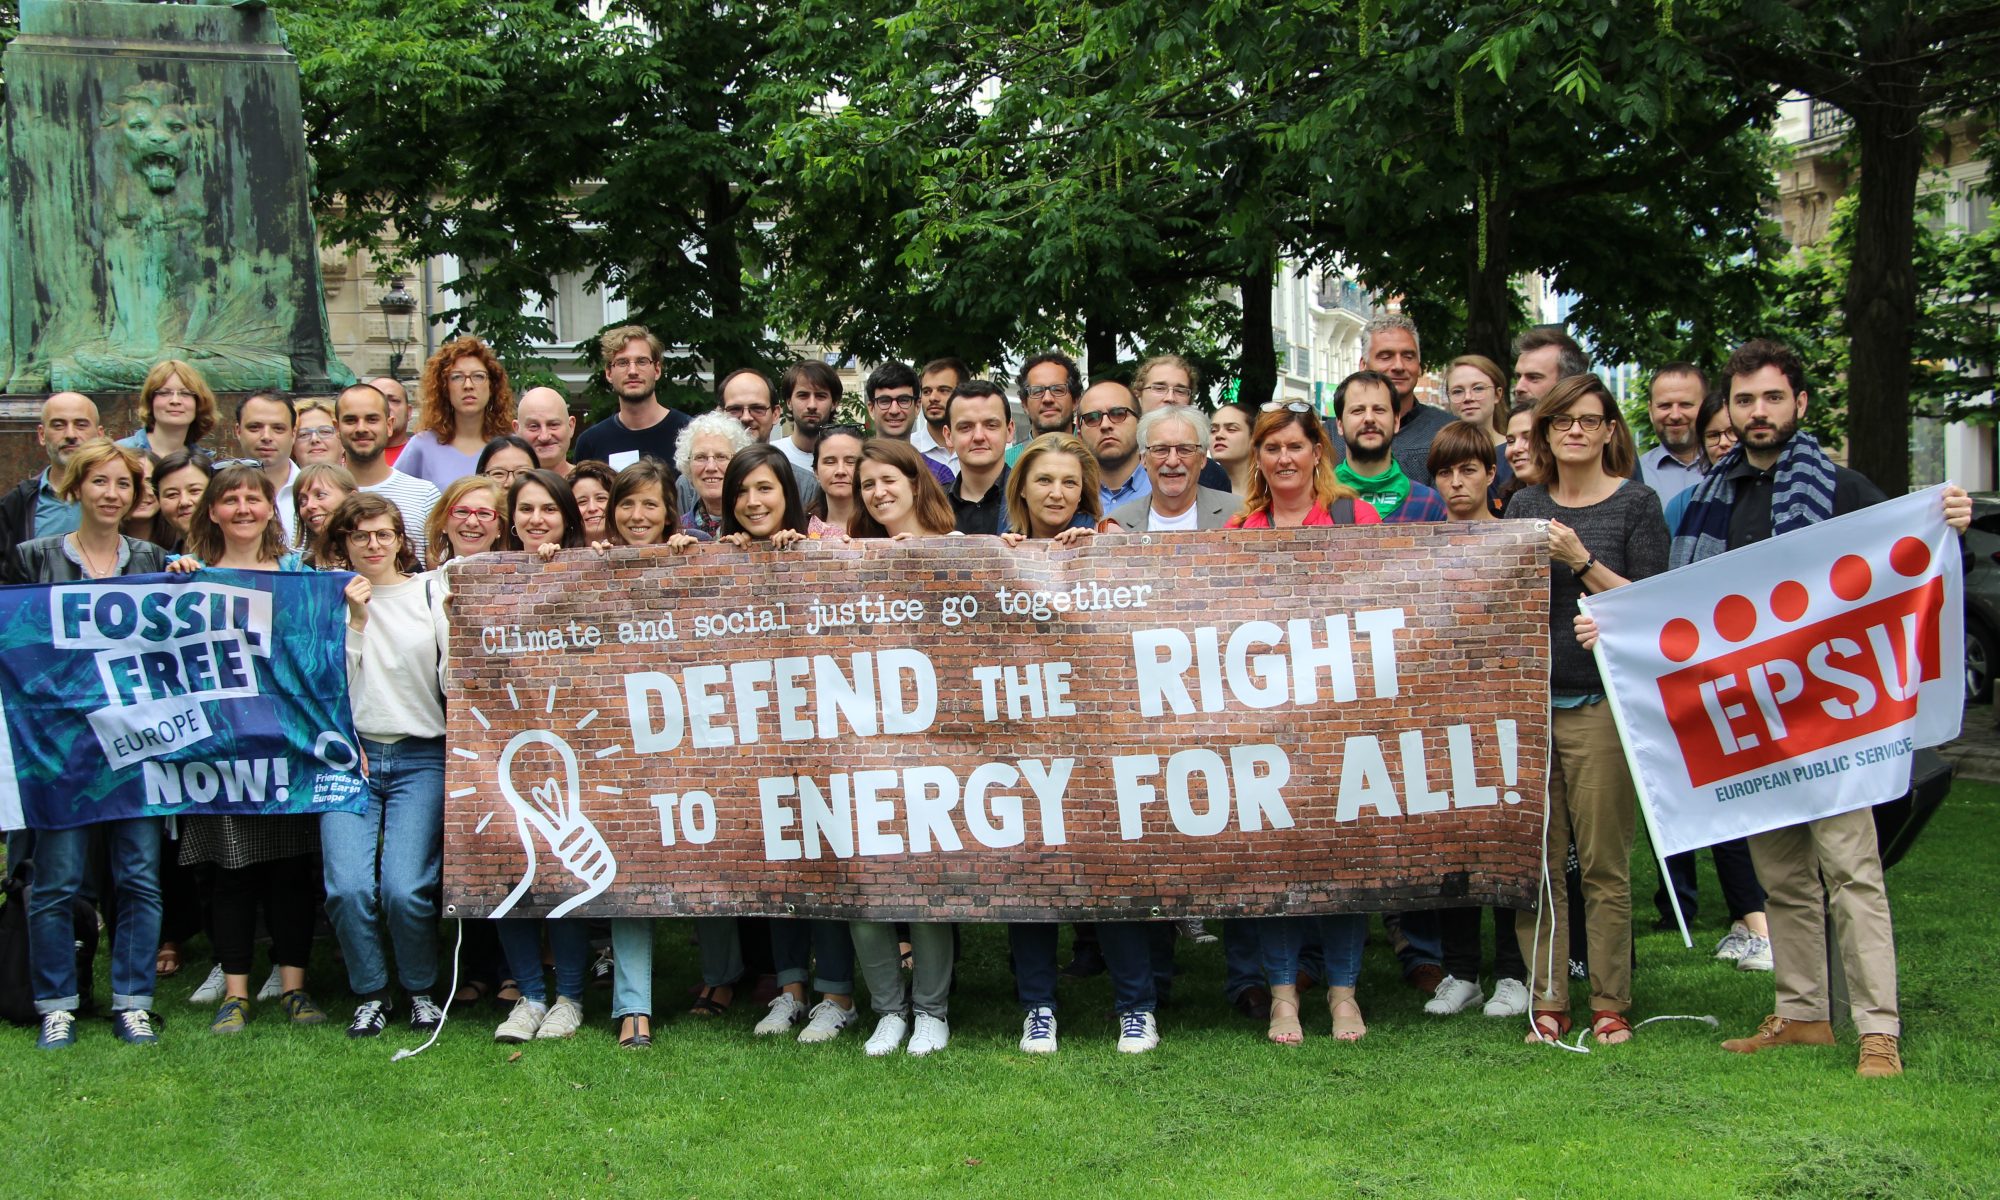 All against energy poverty